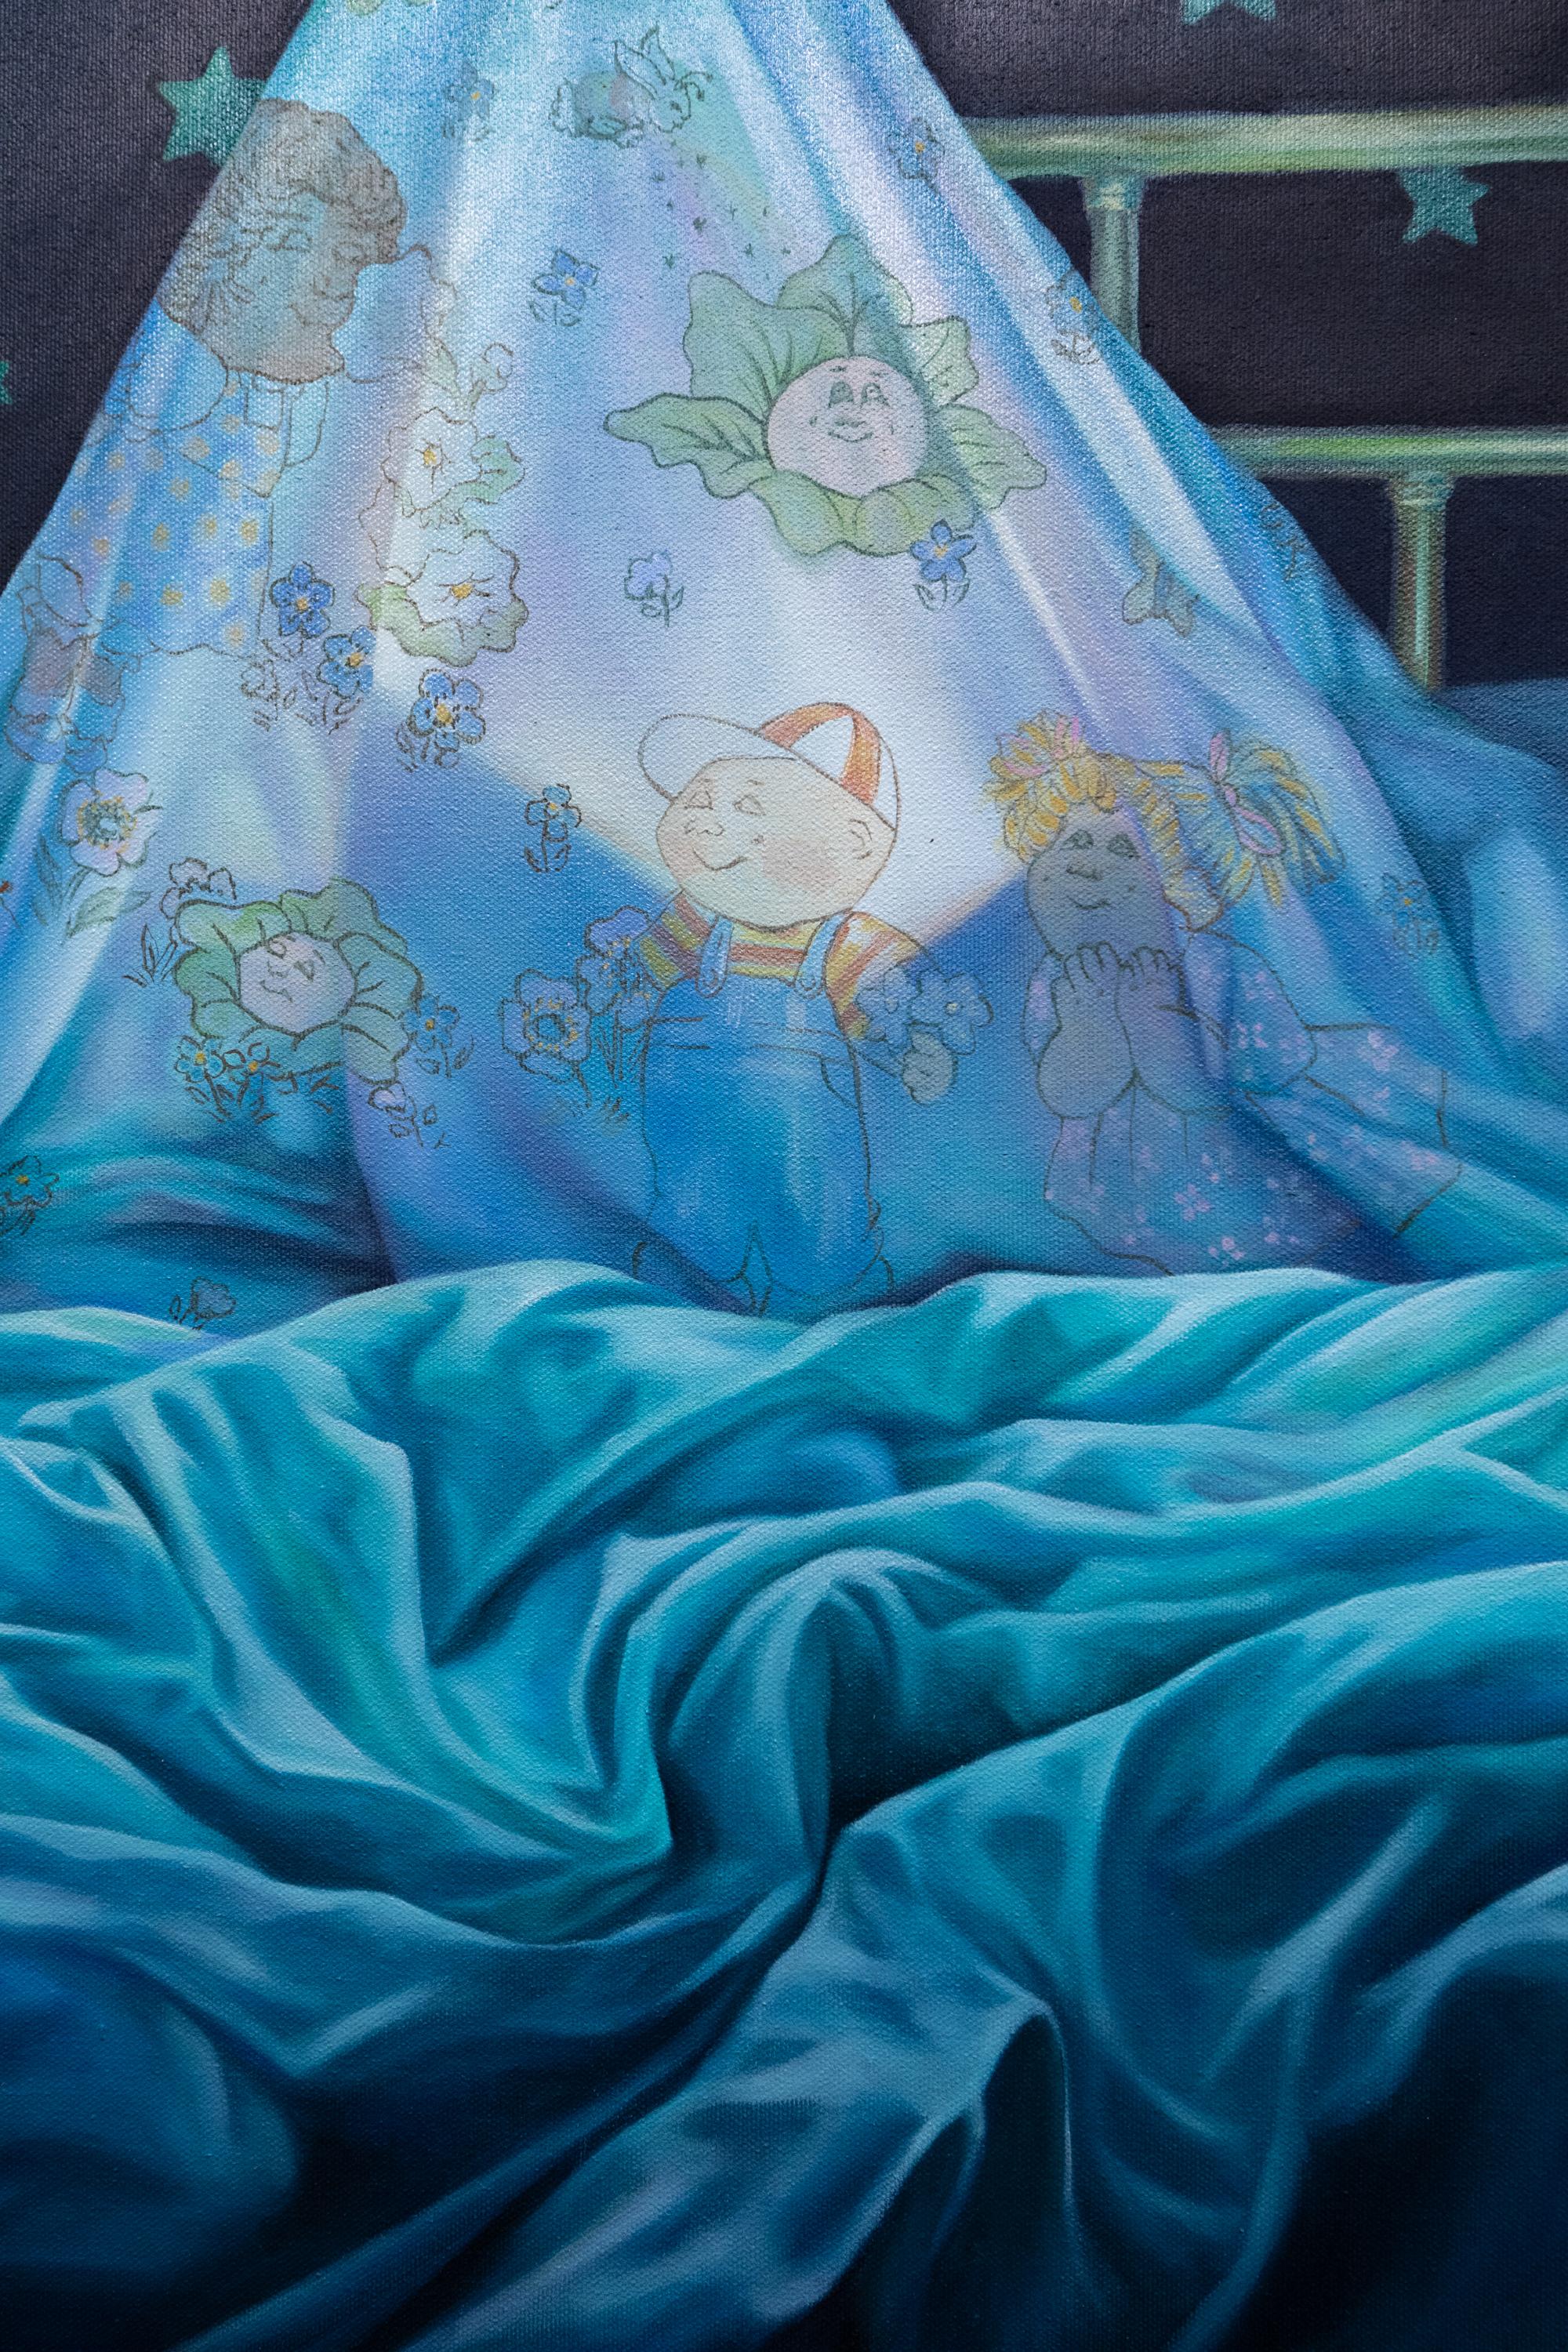 Just 5 More Minutes? - Contemporary Painting by Sarah Detweiler